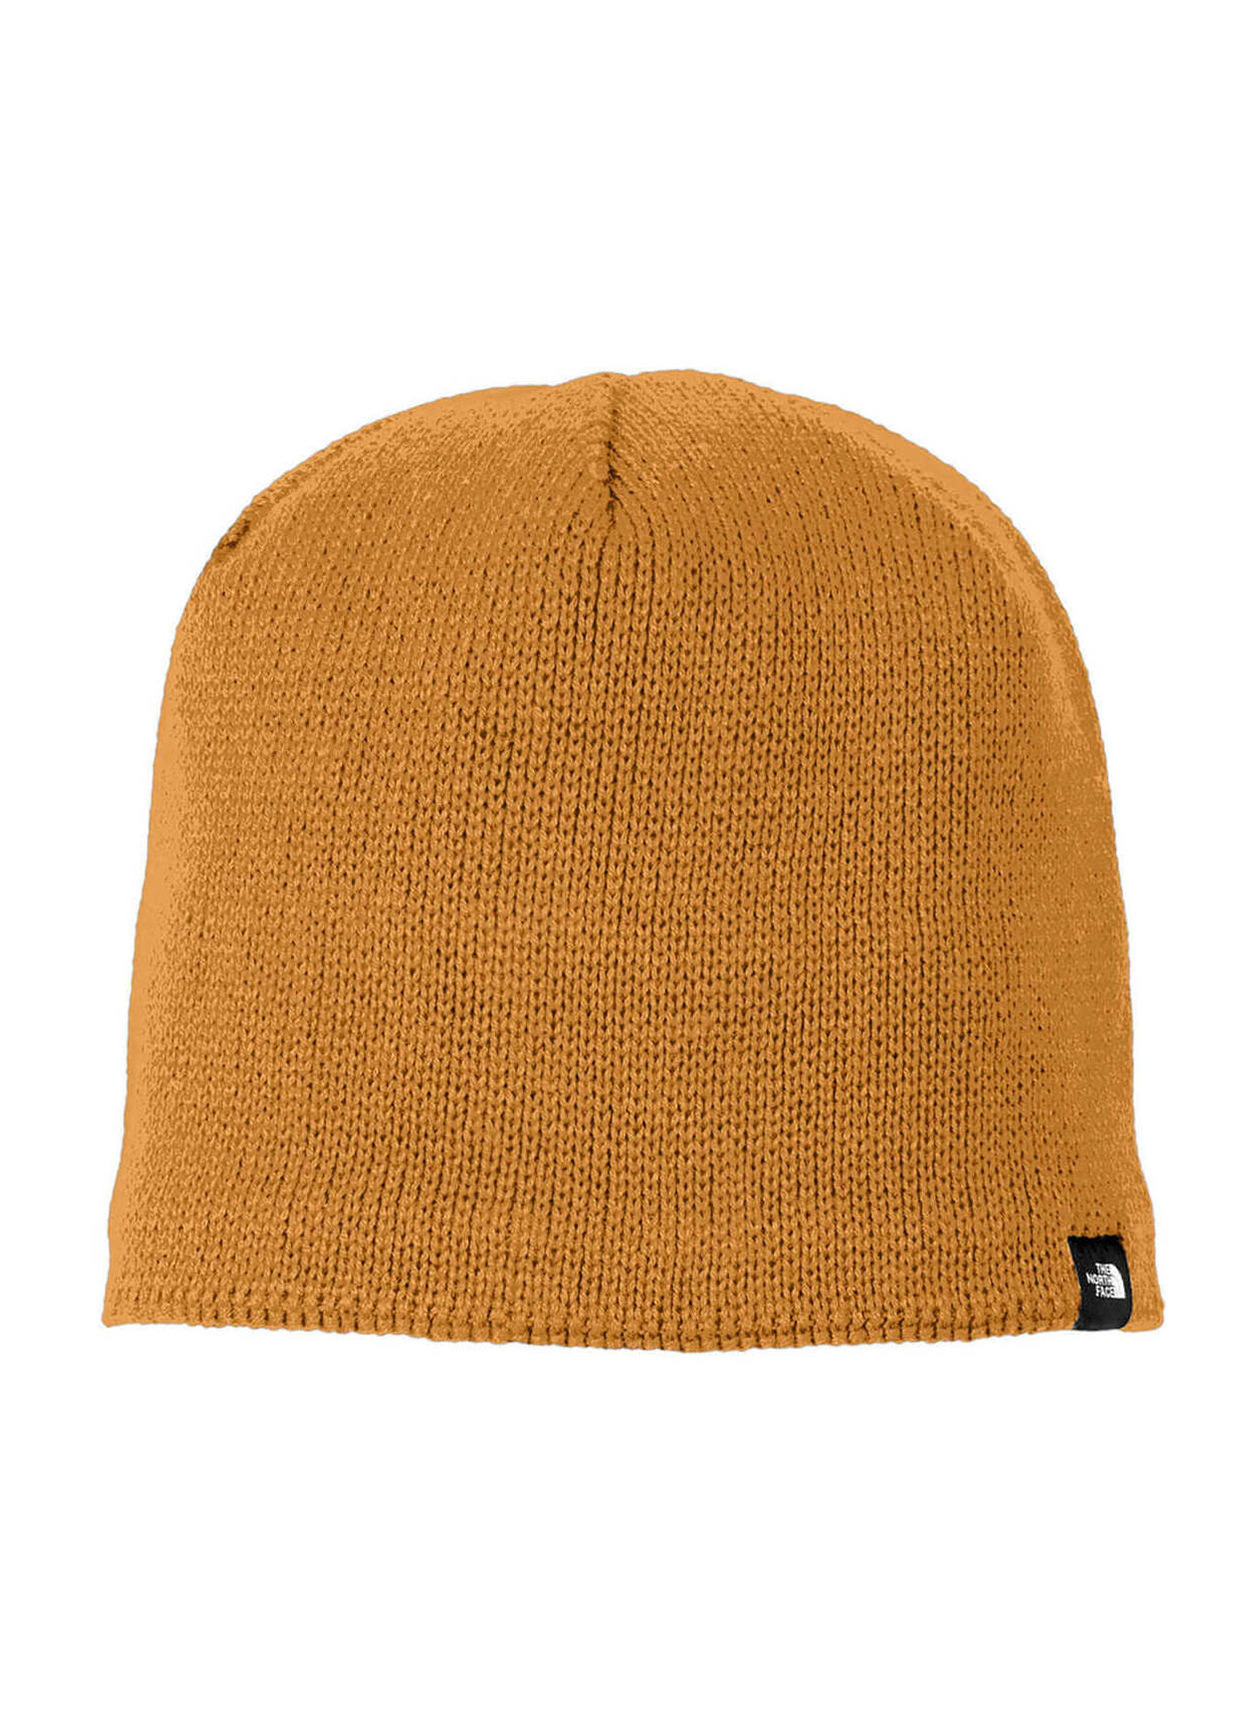 Mountain Timber The Face North Beanie The Face Tan | North